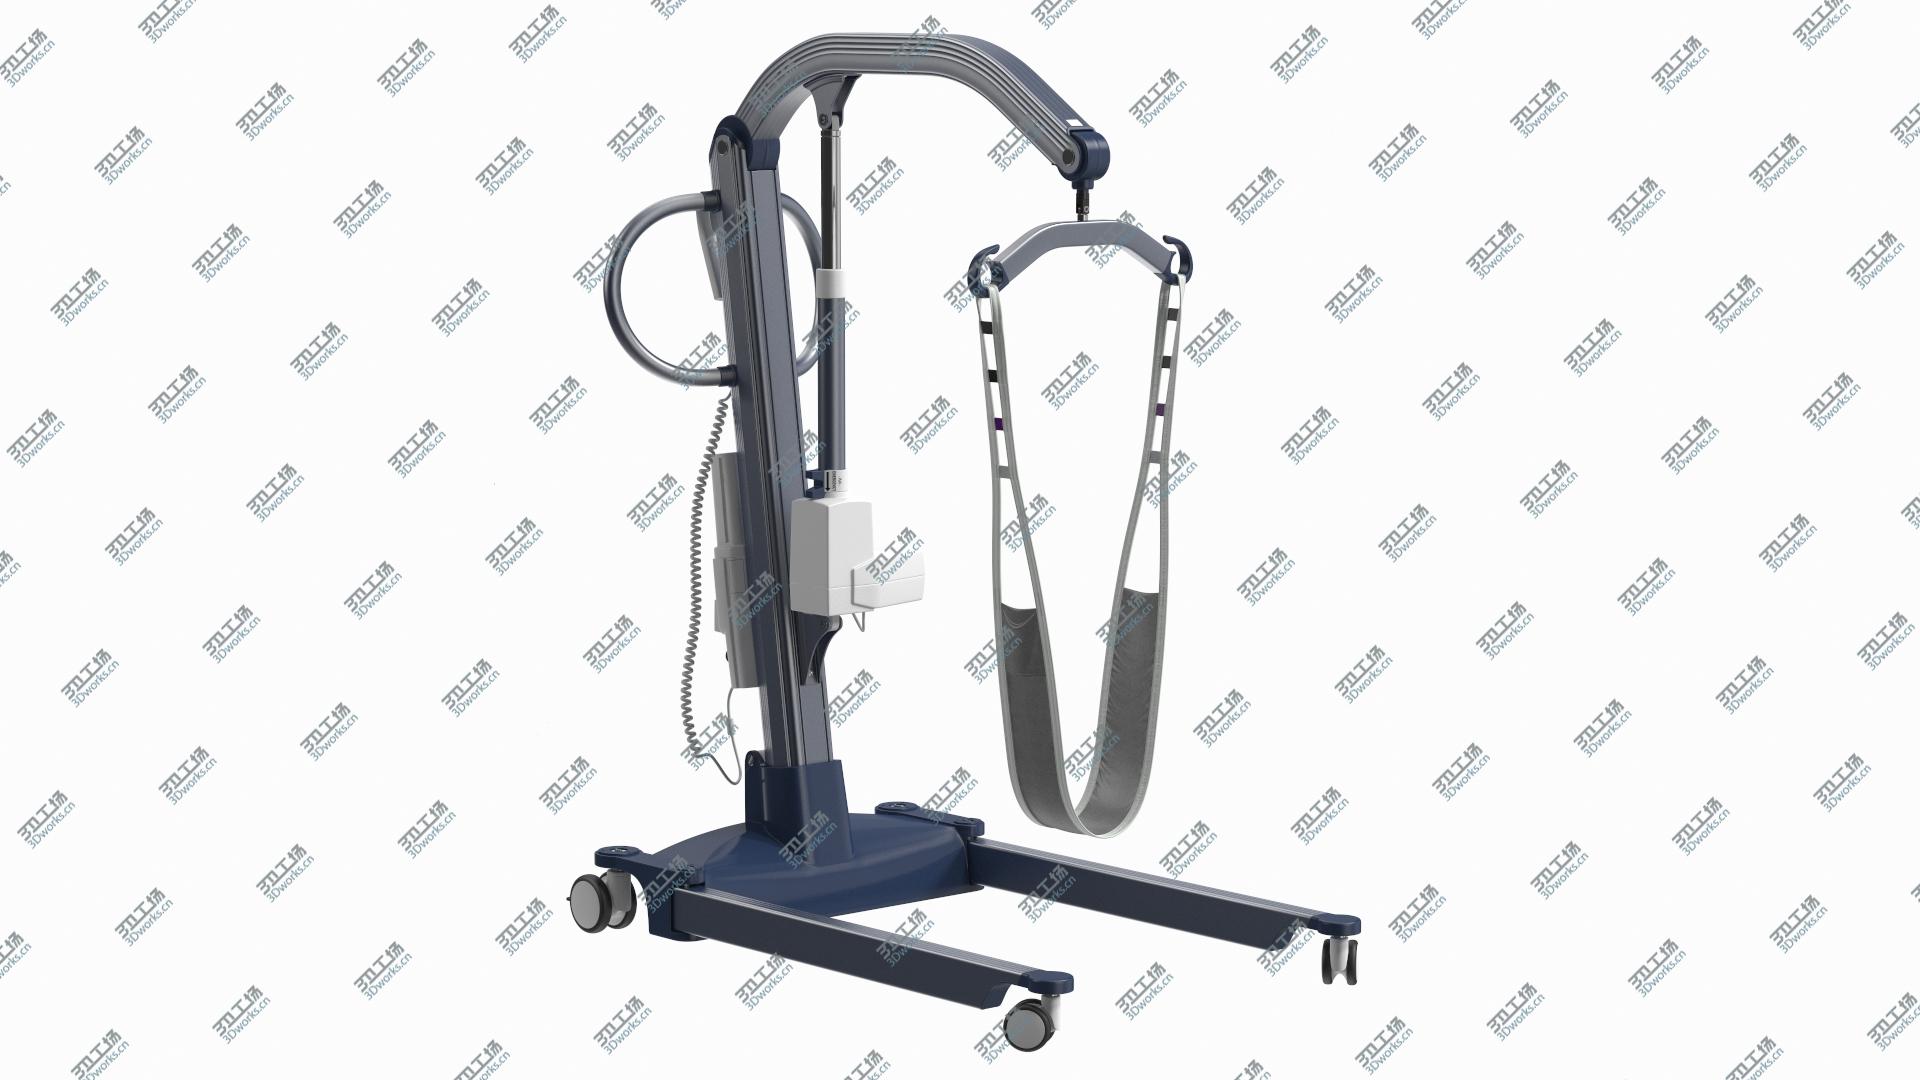 images/goods_img/202104091/Patient Lift with Leg Holder model/2.jpg